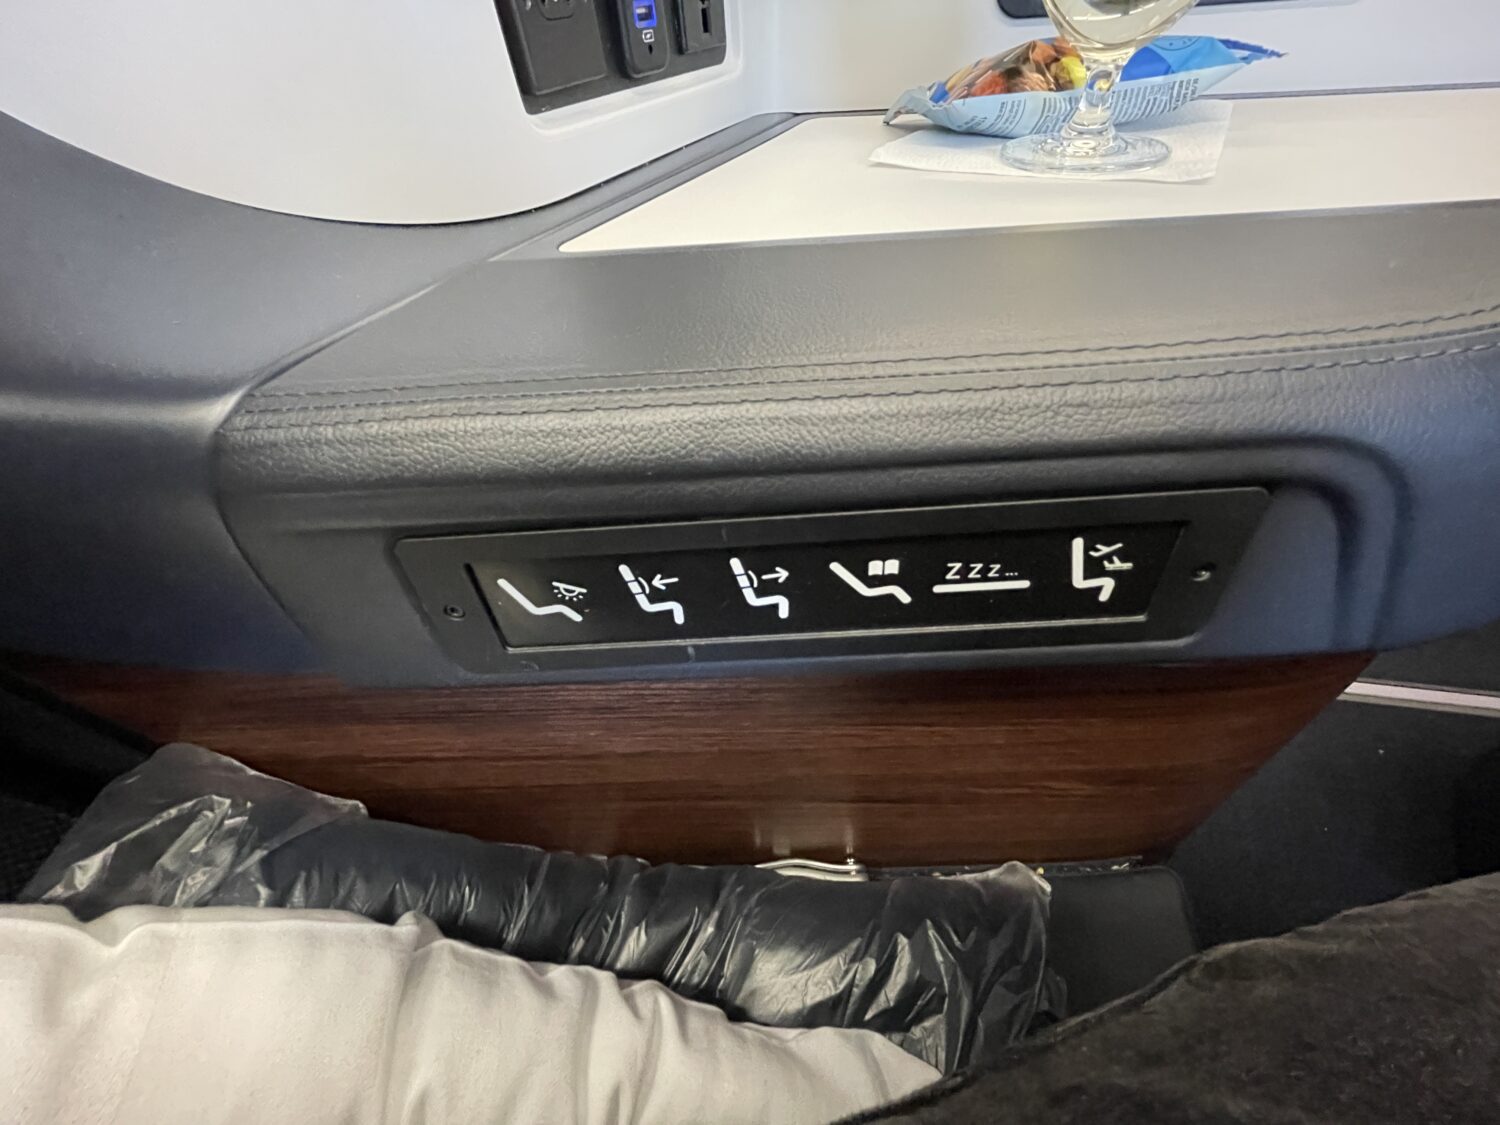 Condor Airlines Business Class Seat Controls